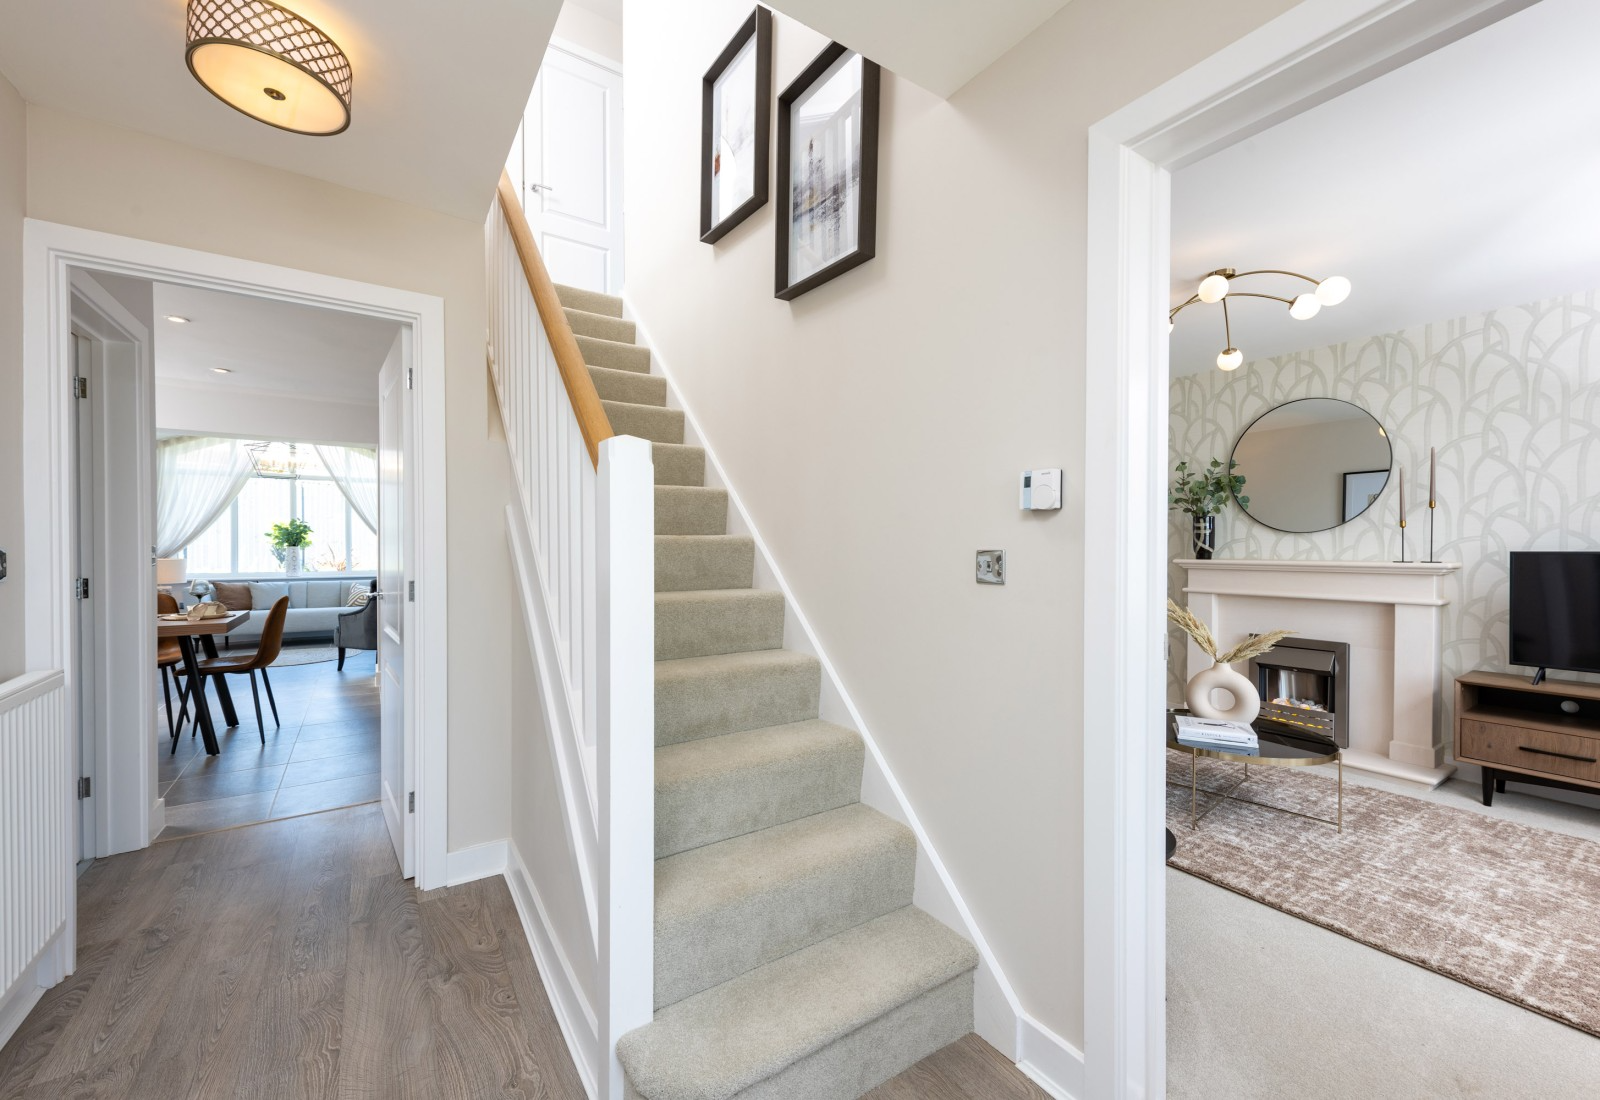 The Northwood Showhome